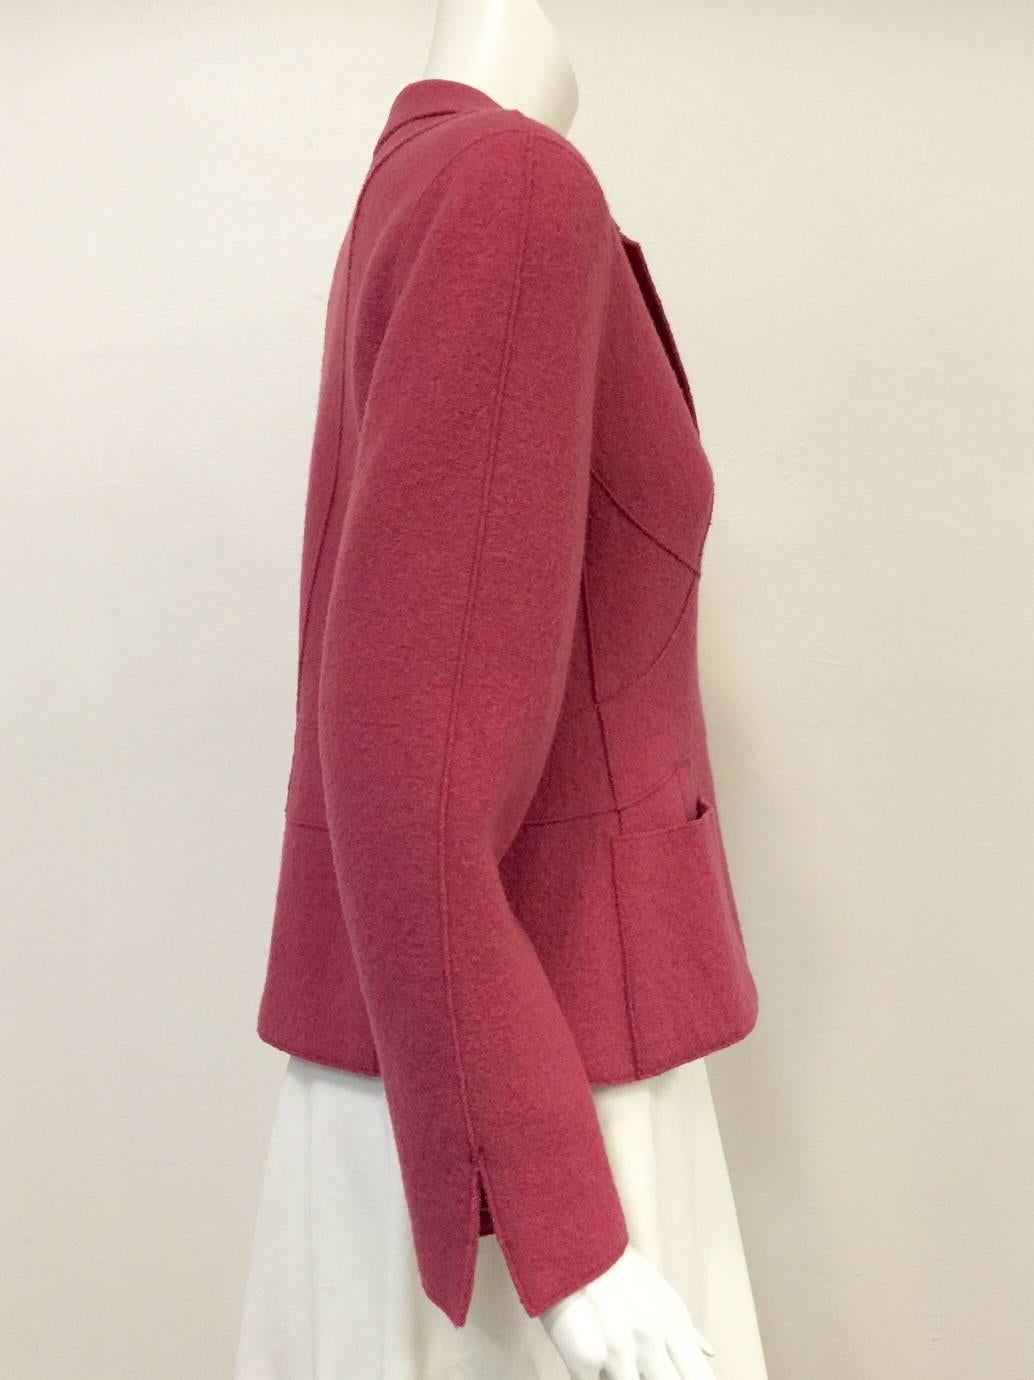 Chanel Fall 1999 Berry Boiled Wool Fitted Jacket  In Excellent Condition For Sale In Palm Beach, FL